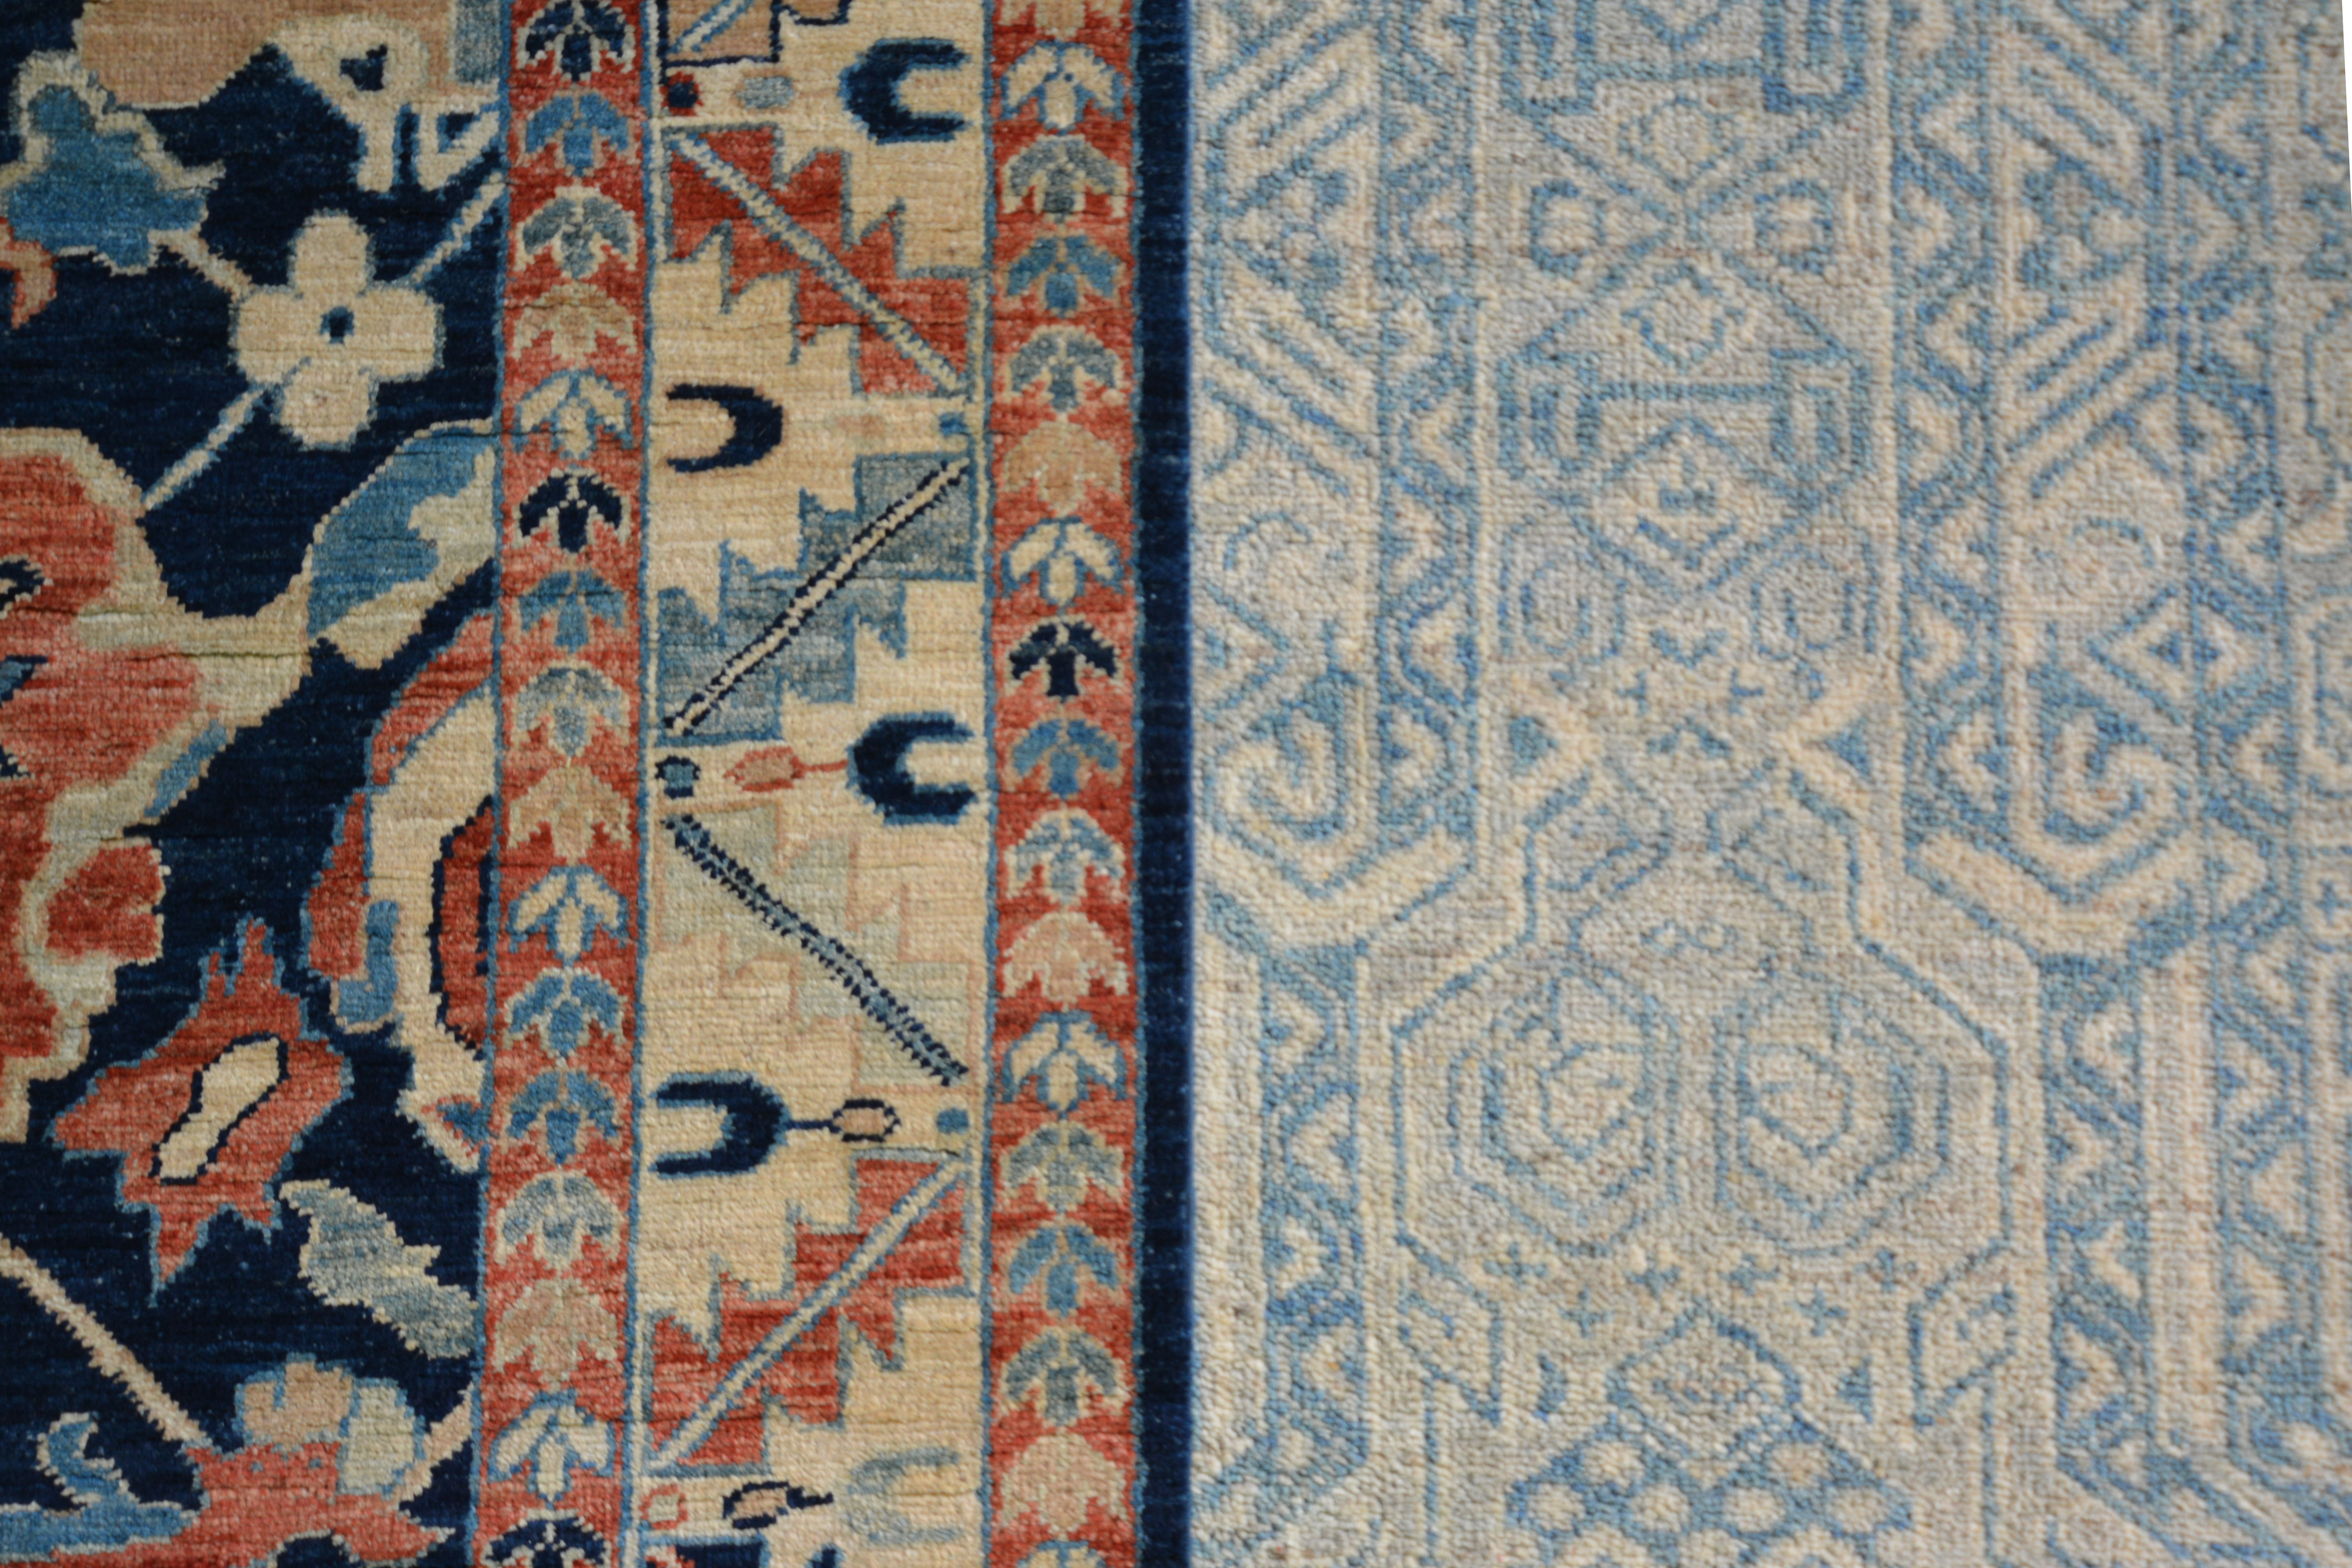 Two carpets of different contrast laying amongst each other to show each of their different intricacies.